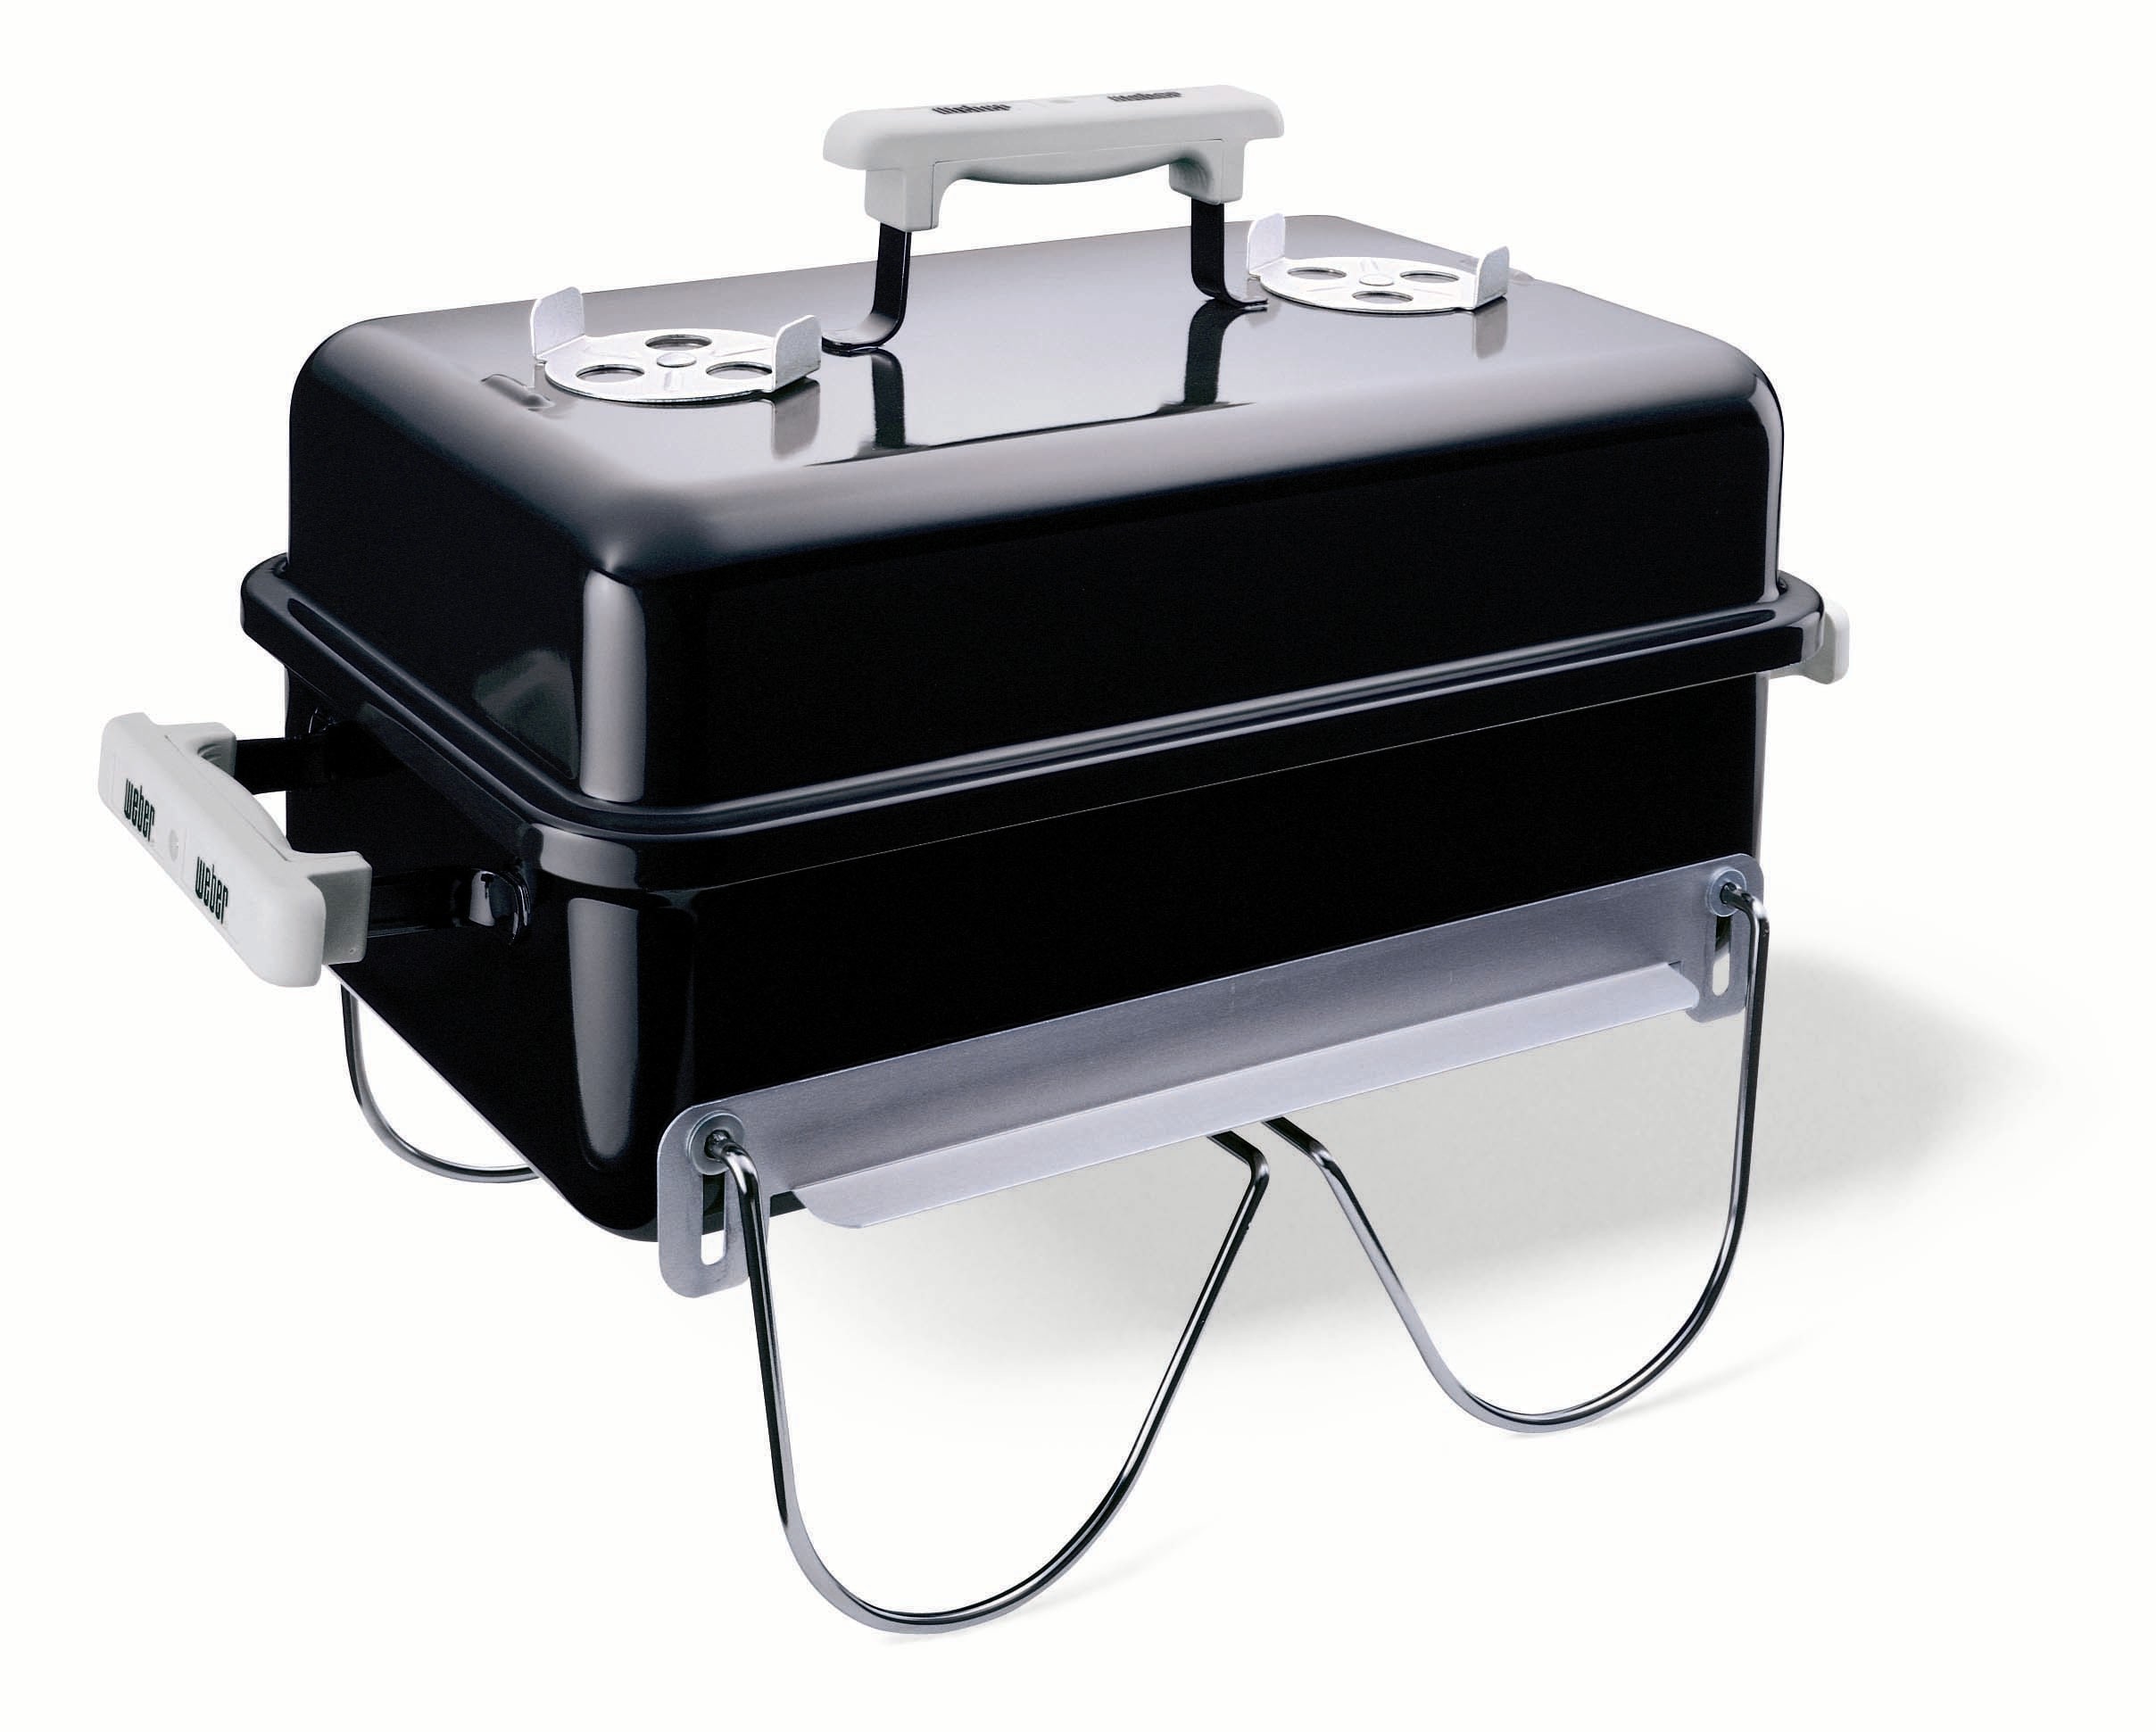 New Weber Smart Grills - What Are They And How Do They Work? - Just Grillin  Outdoor Living - Blog